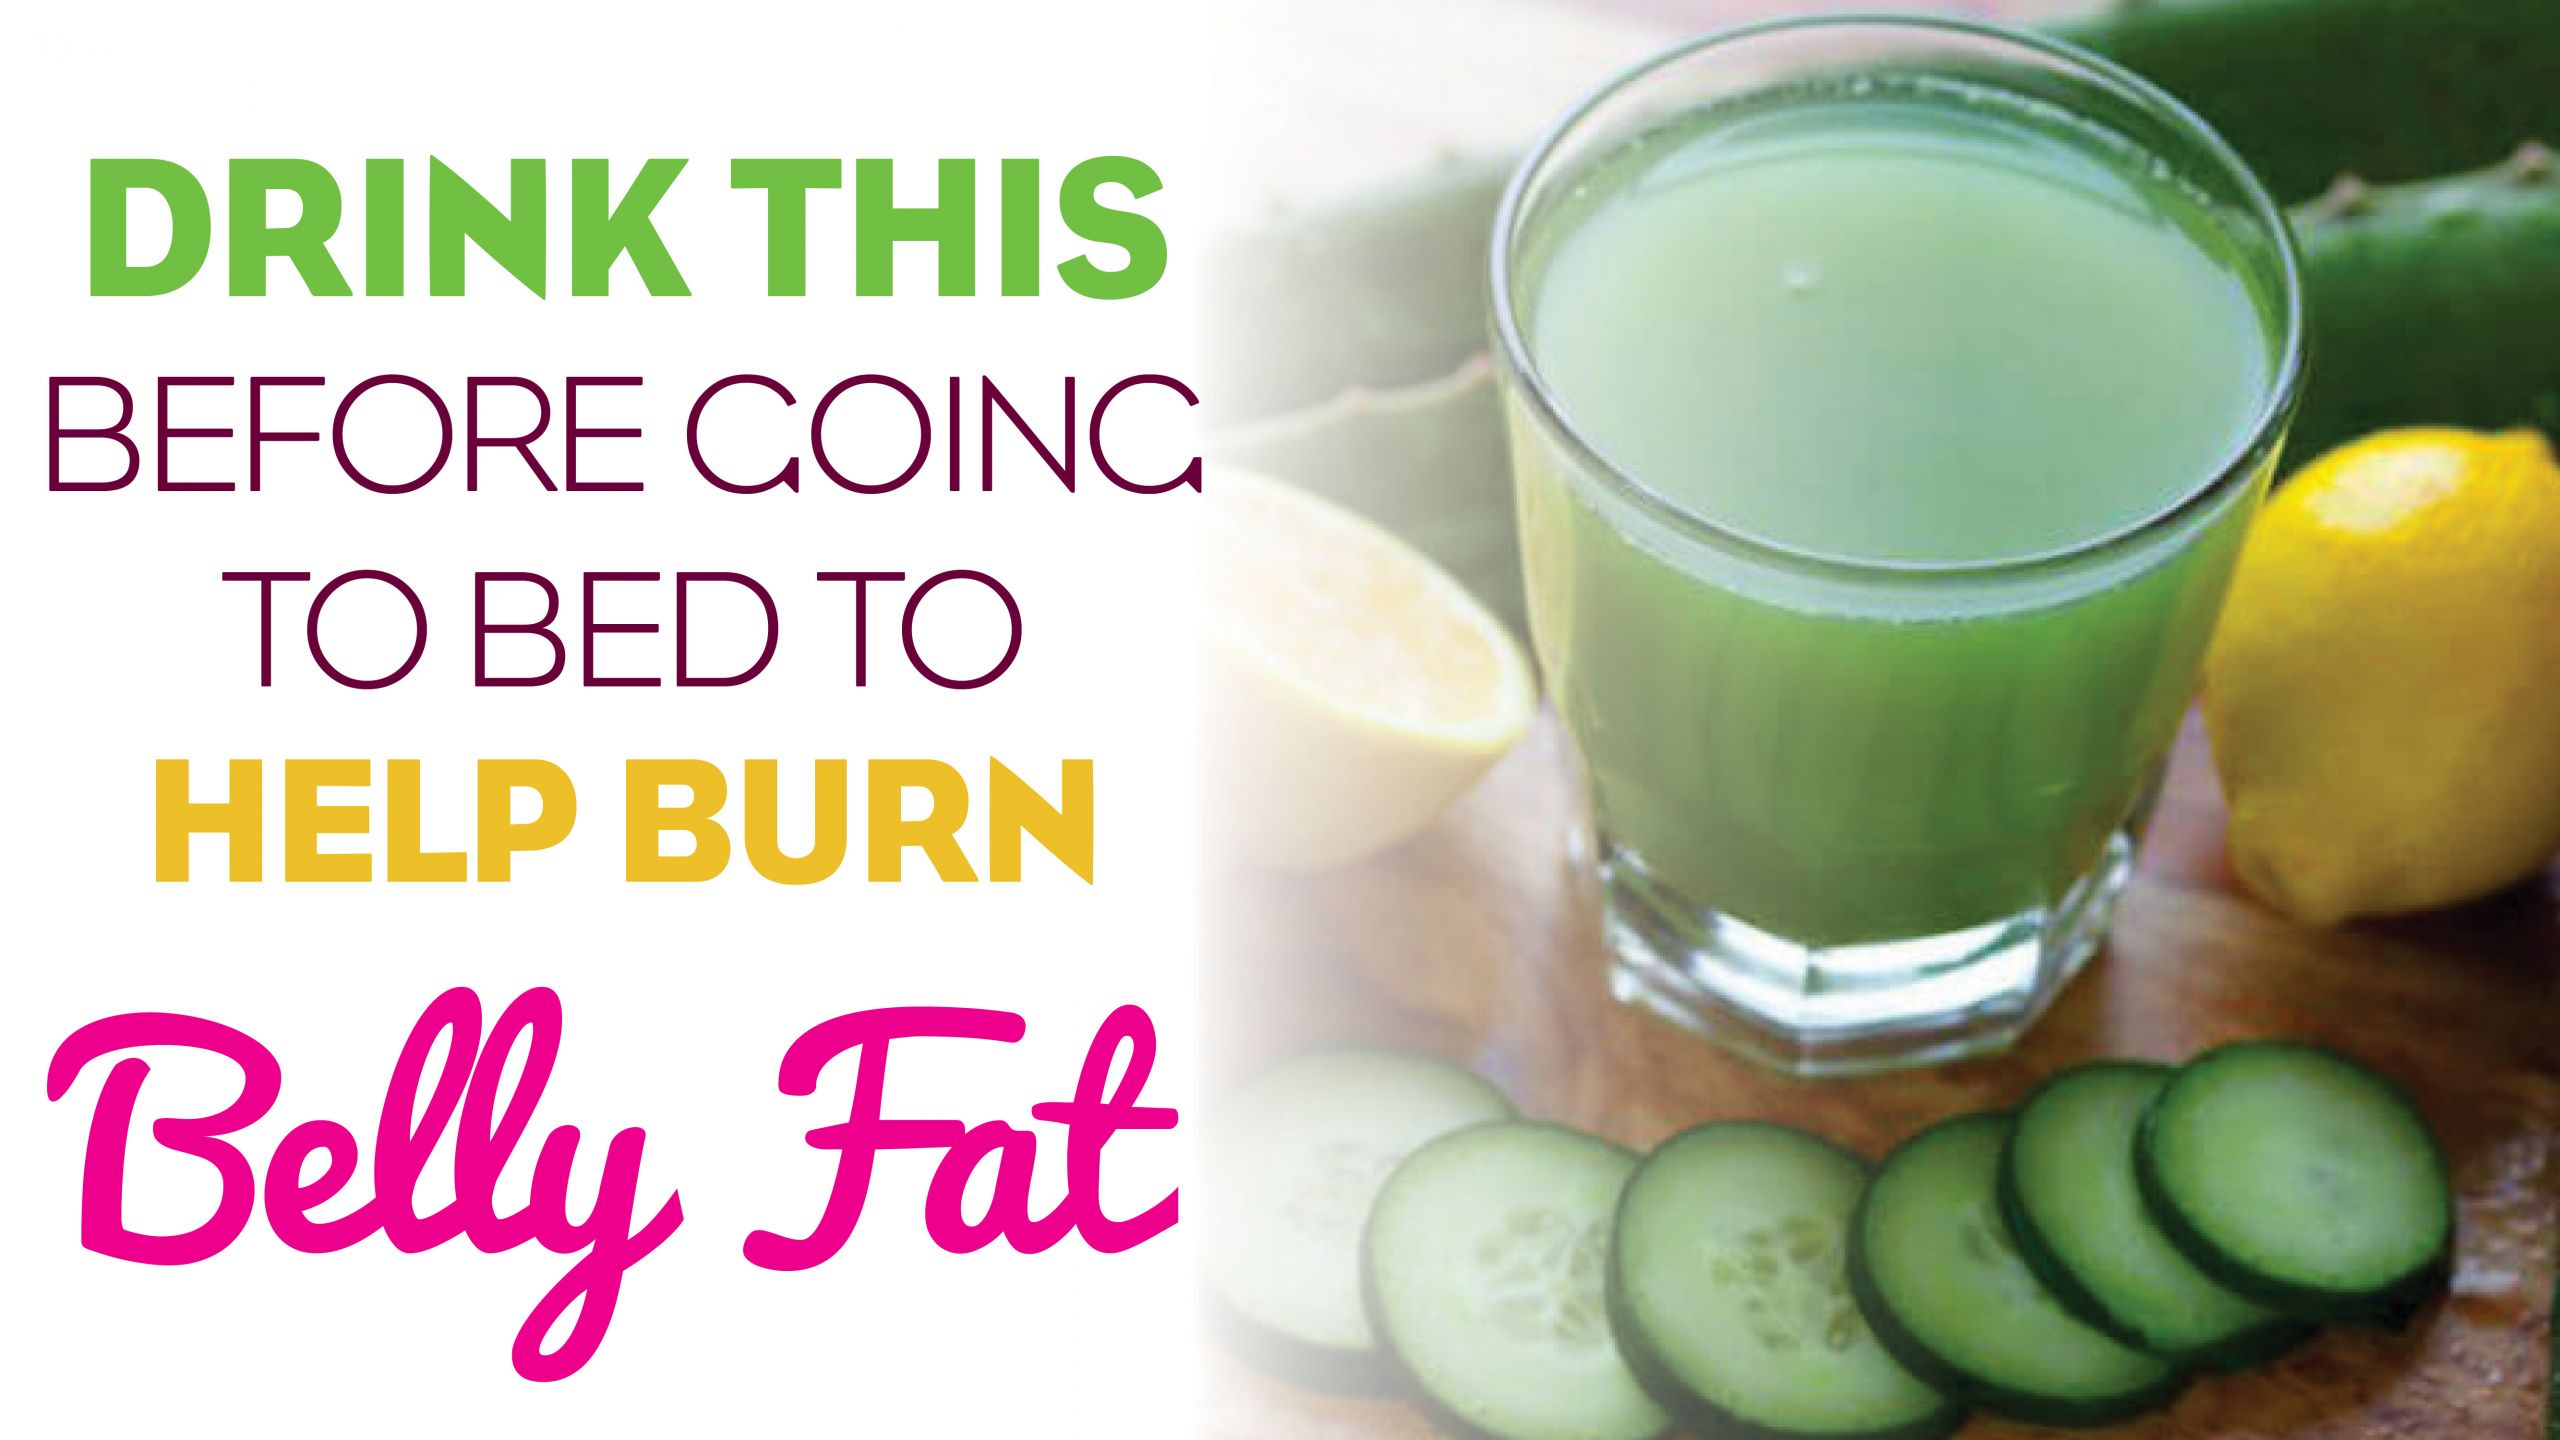 Burn Belly Fat Fast Drink Before Bed
 Drink this Fat Burning Drink Before Going to Bed and Burn